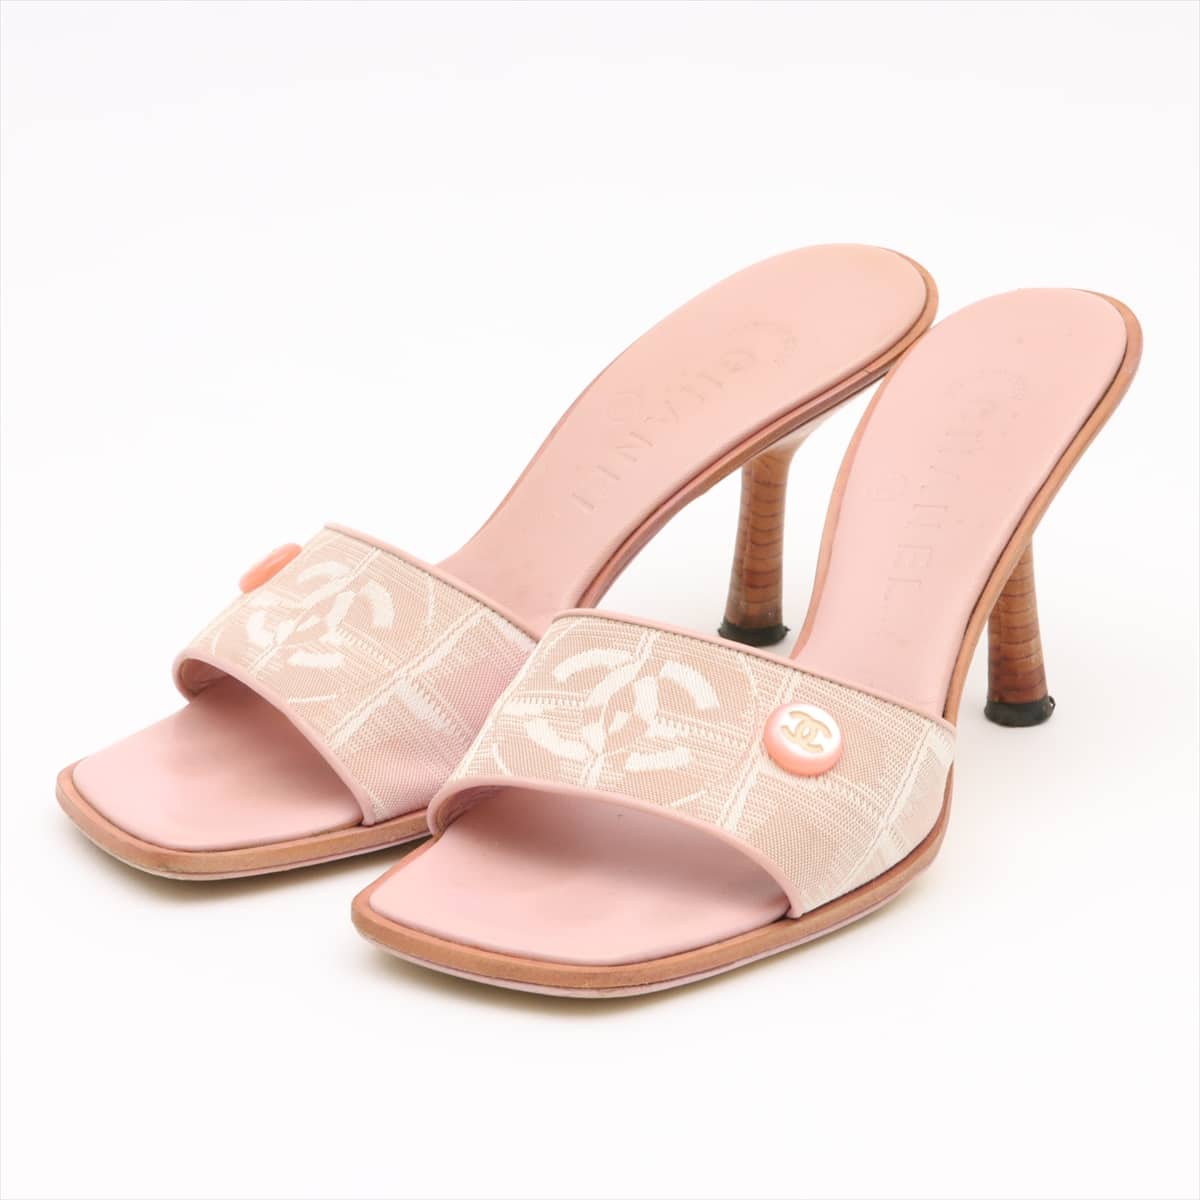 Chanel Coco Button Canvas & leather Sandals 37 Ladies' Pink New Travel Line